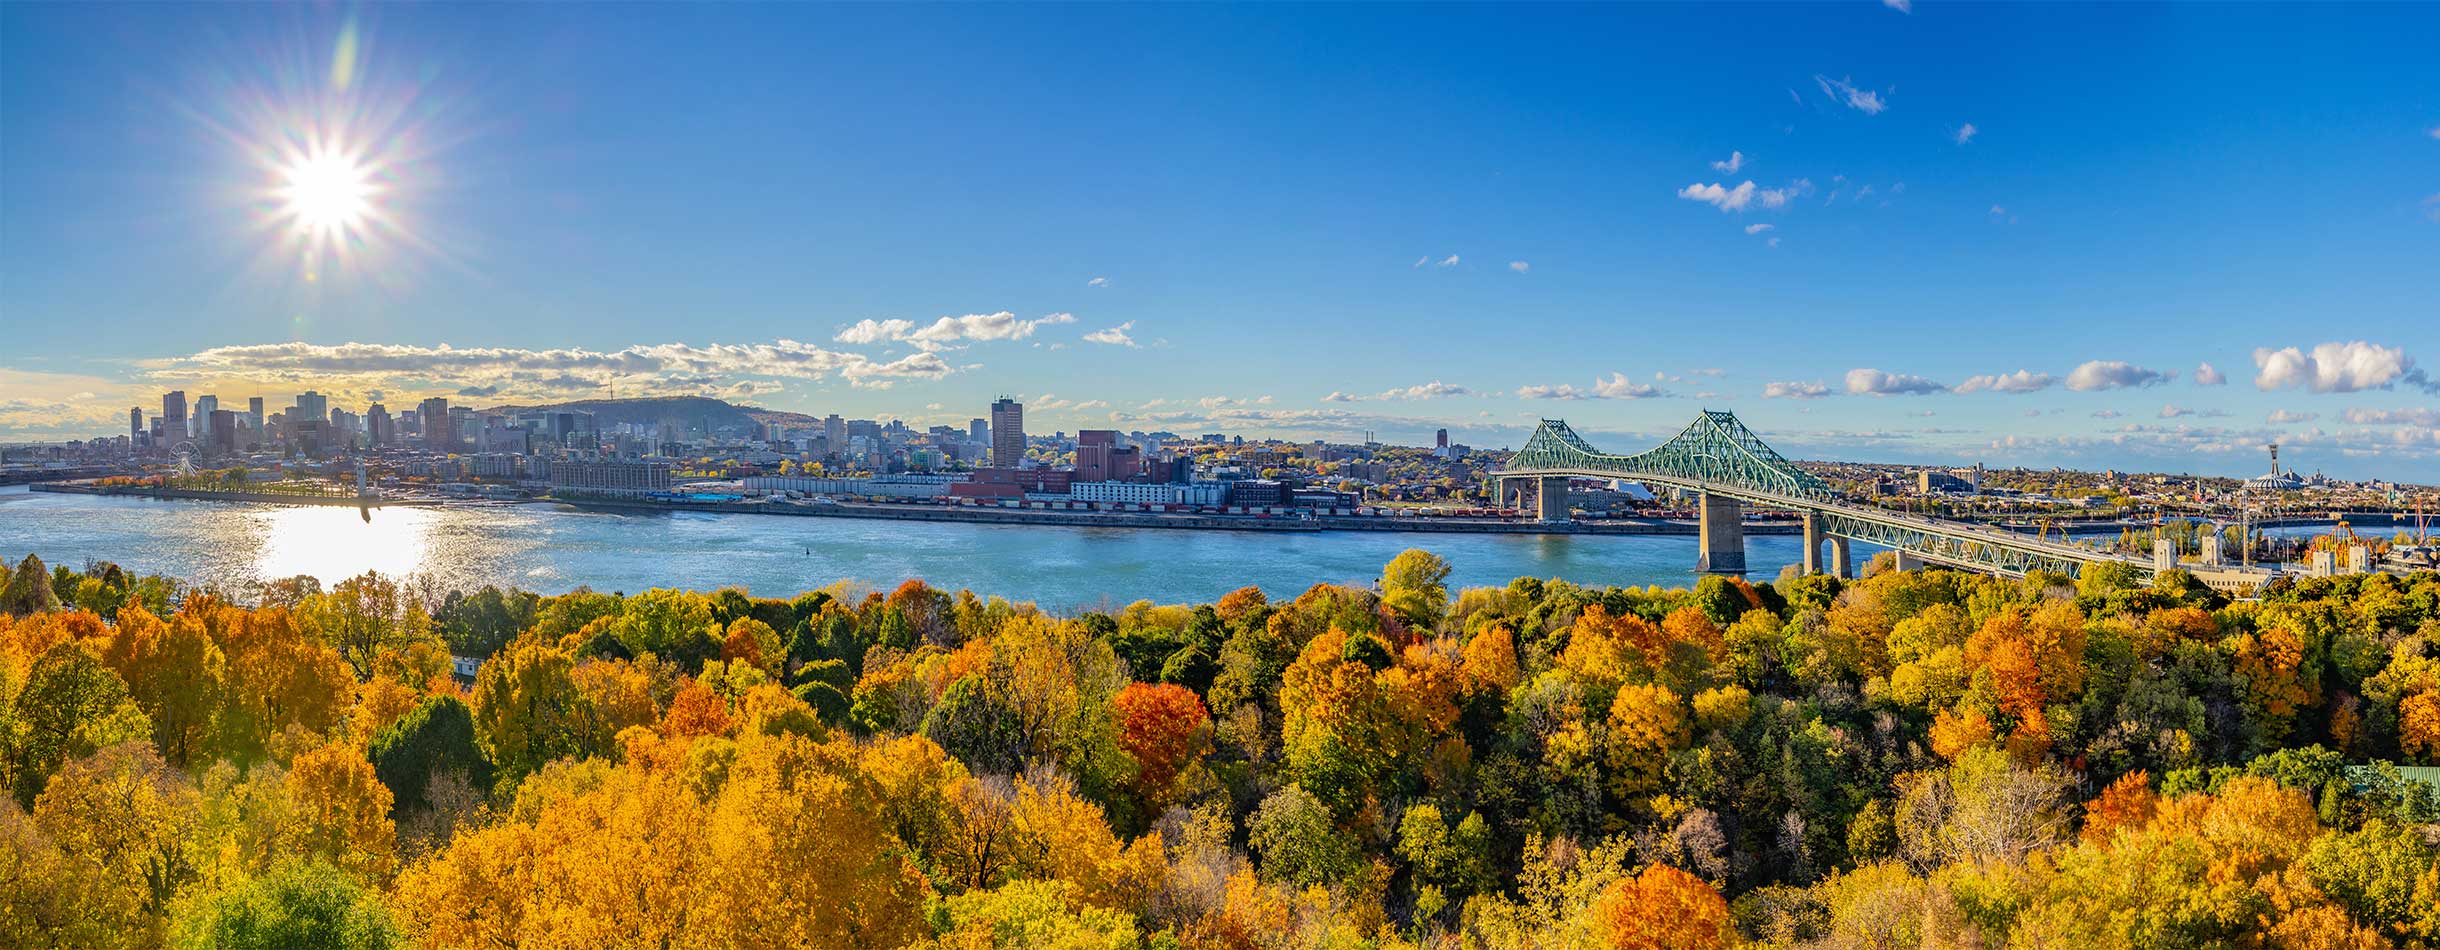 Panorama of Montreal, Quebec, Canada, and the Saint-Lawrence river in autumn